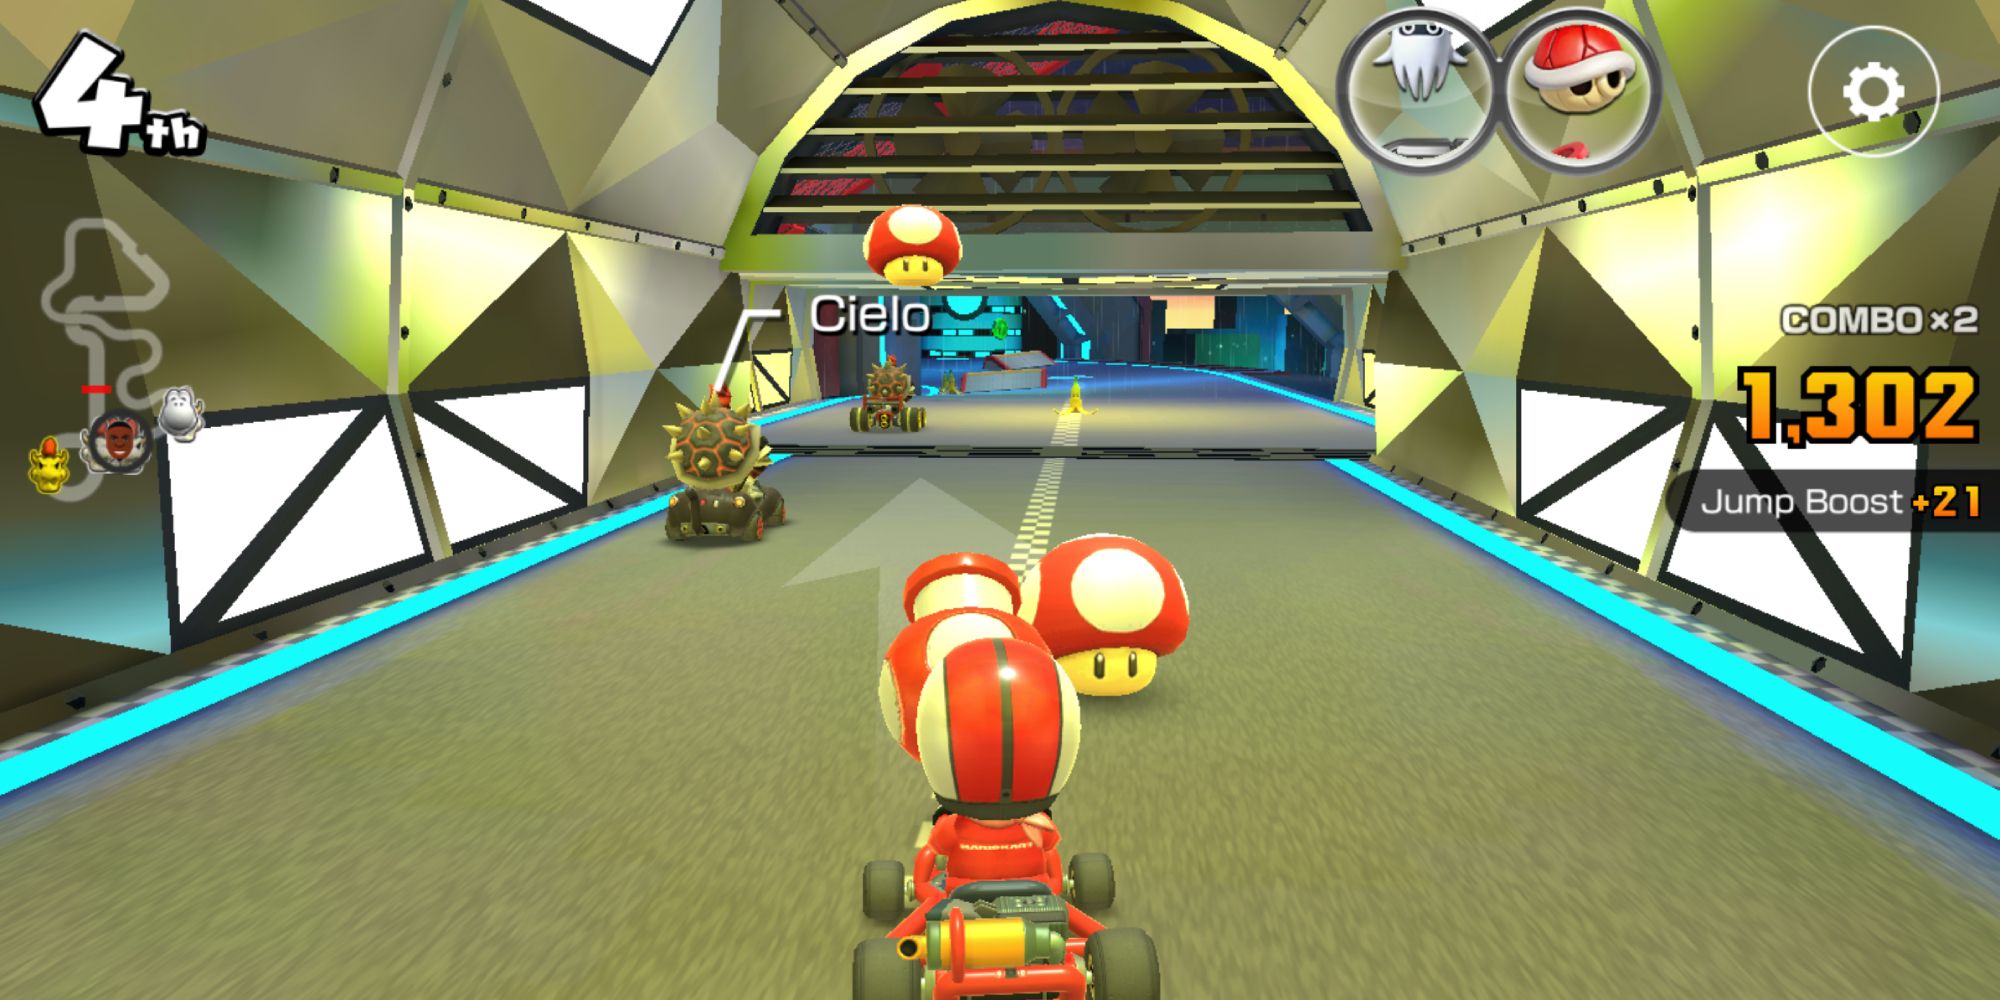 Mario Kart Tour intense multiplayer race with player at 4th position shooting a mushroom